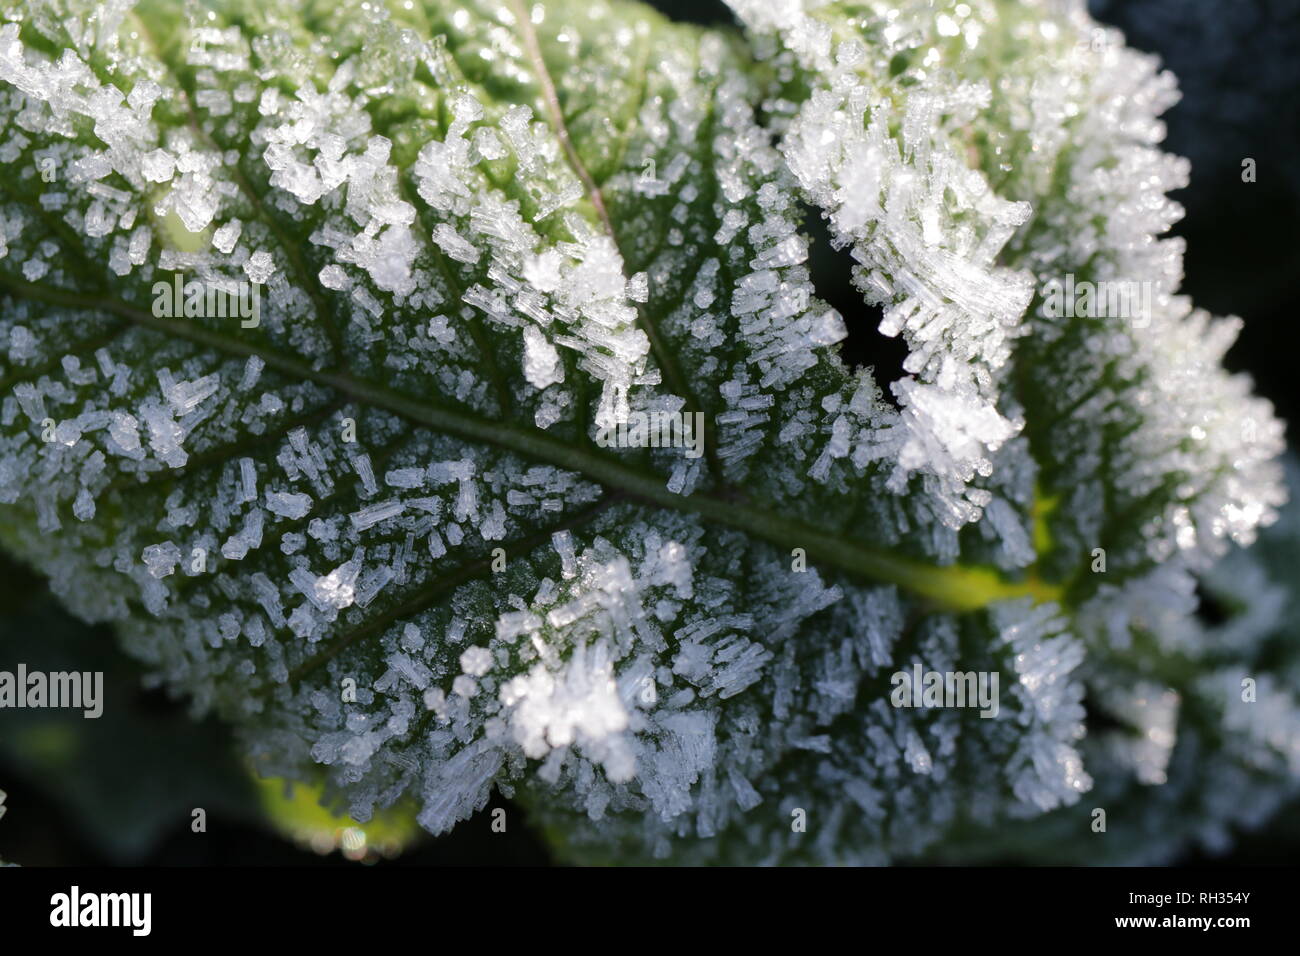 Frost crystals on a charlock, or wild mustard, plant Stock Photo